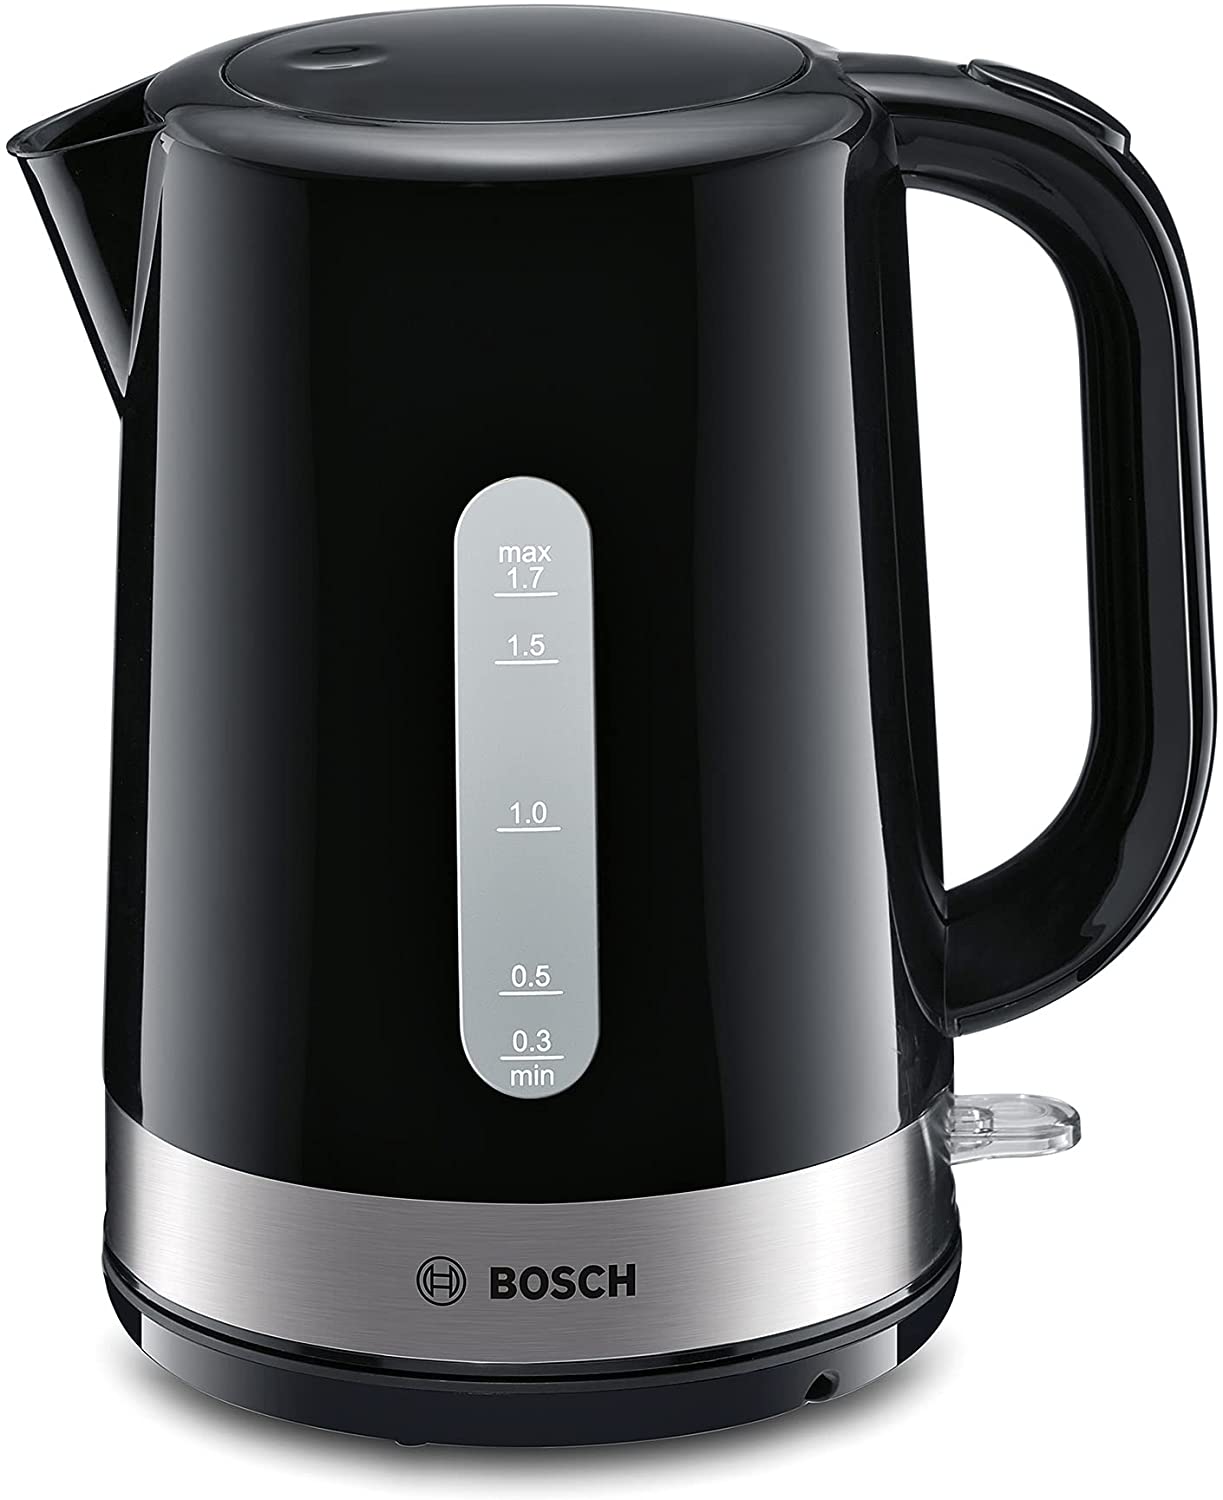 Bosch TWK7403 wireless kettle, automatic steam stop, overheating protection, removable limescale filter, 1.7 L, 2200 W, stainless steel/black